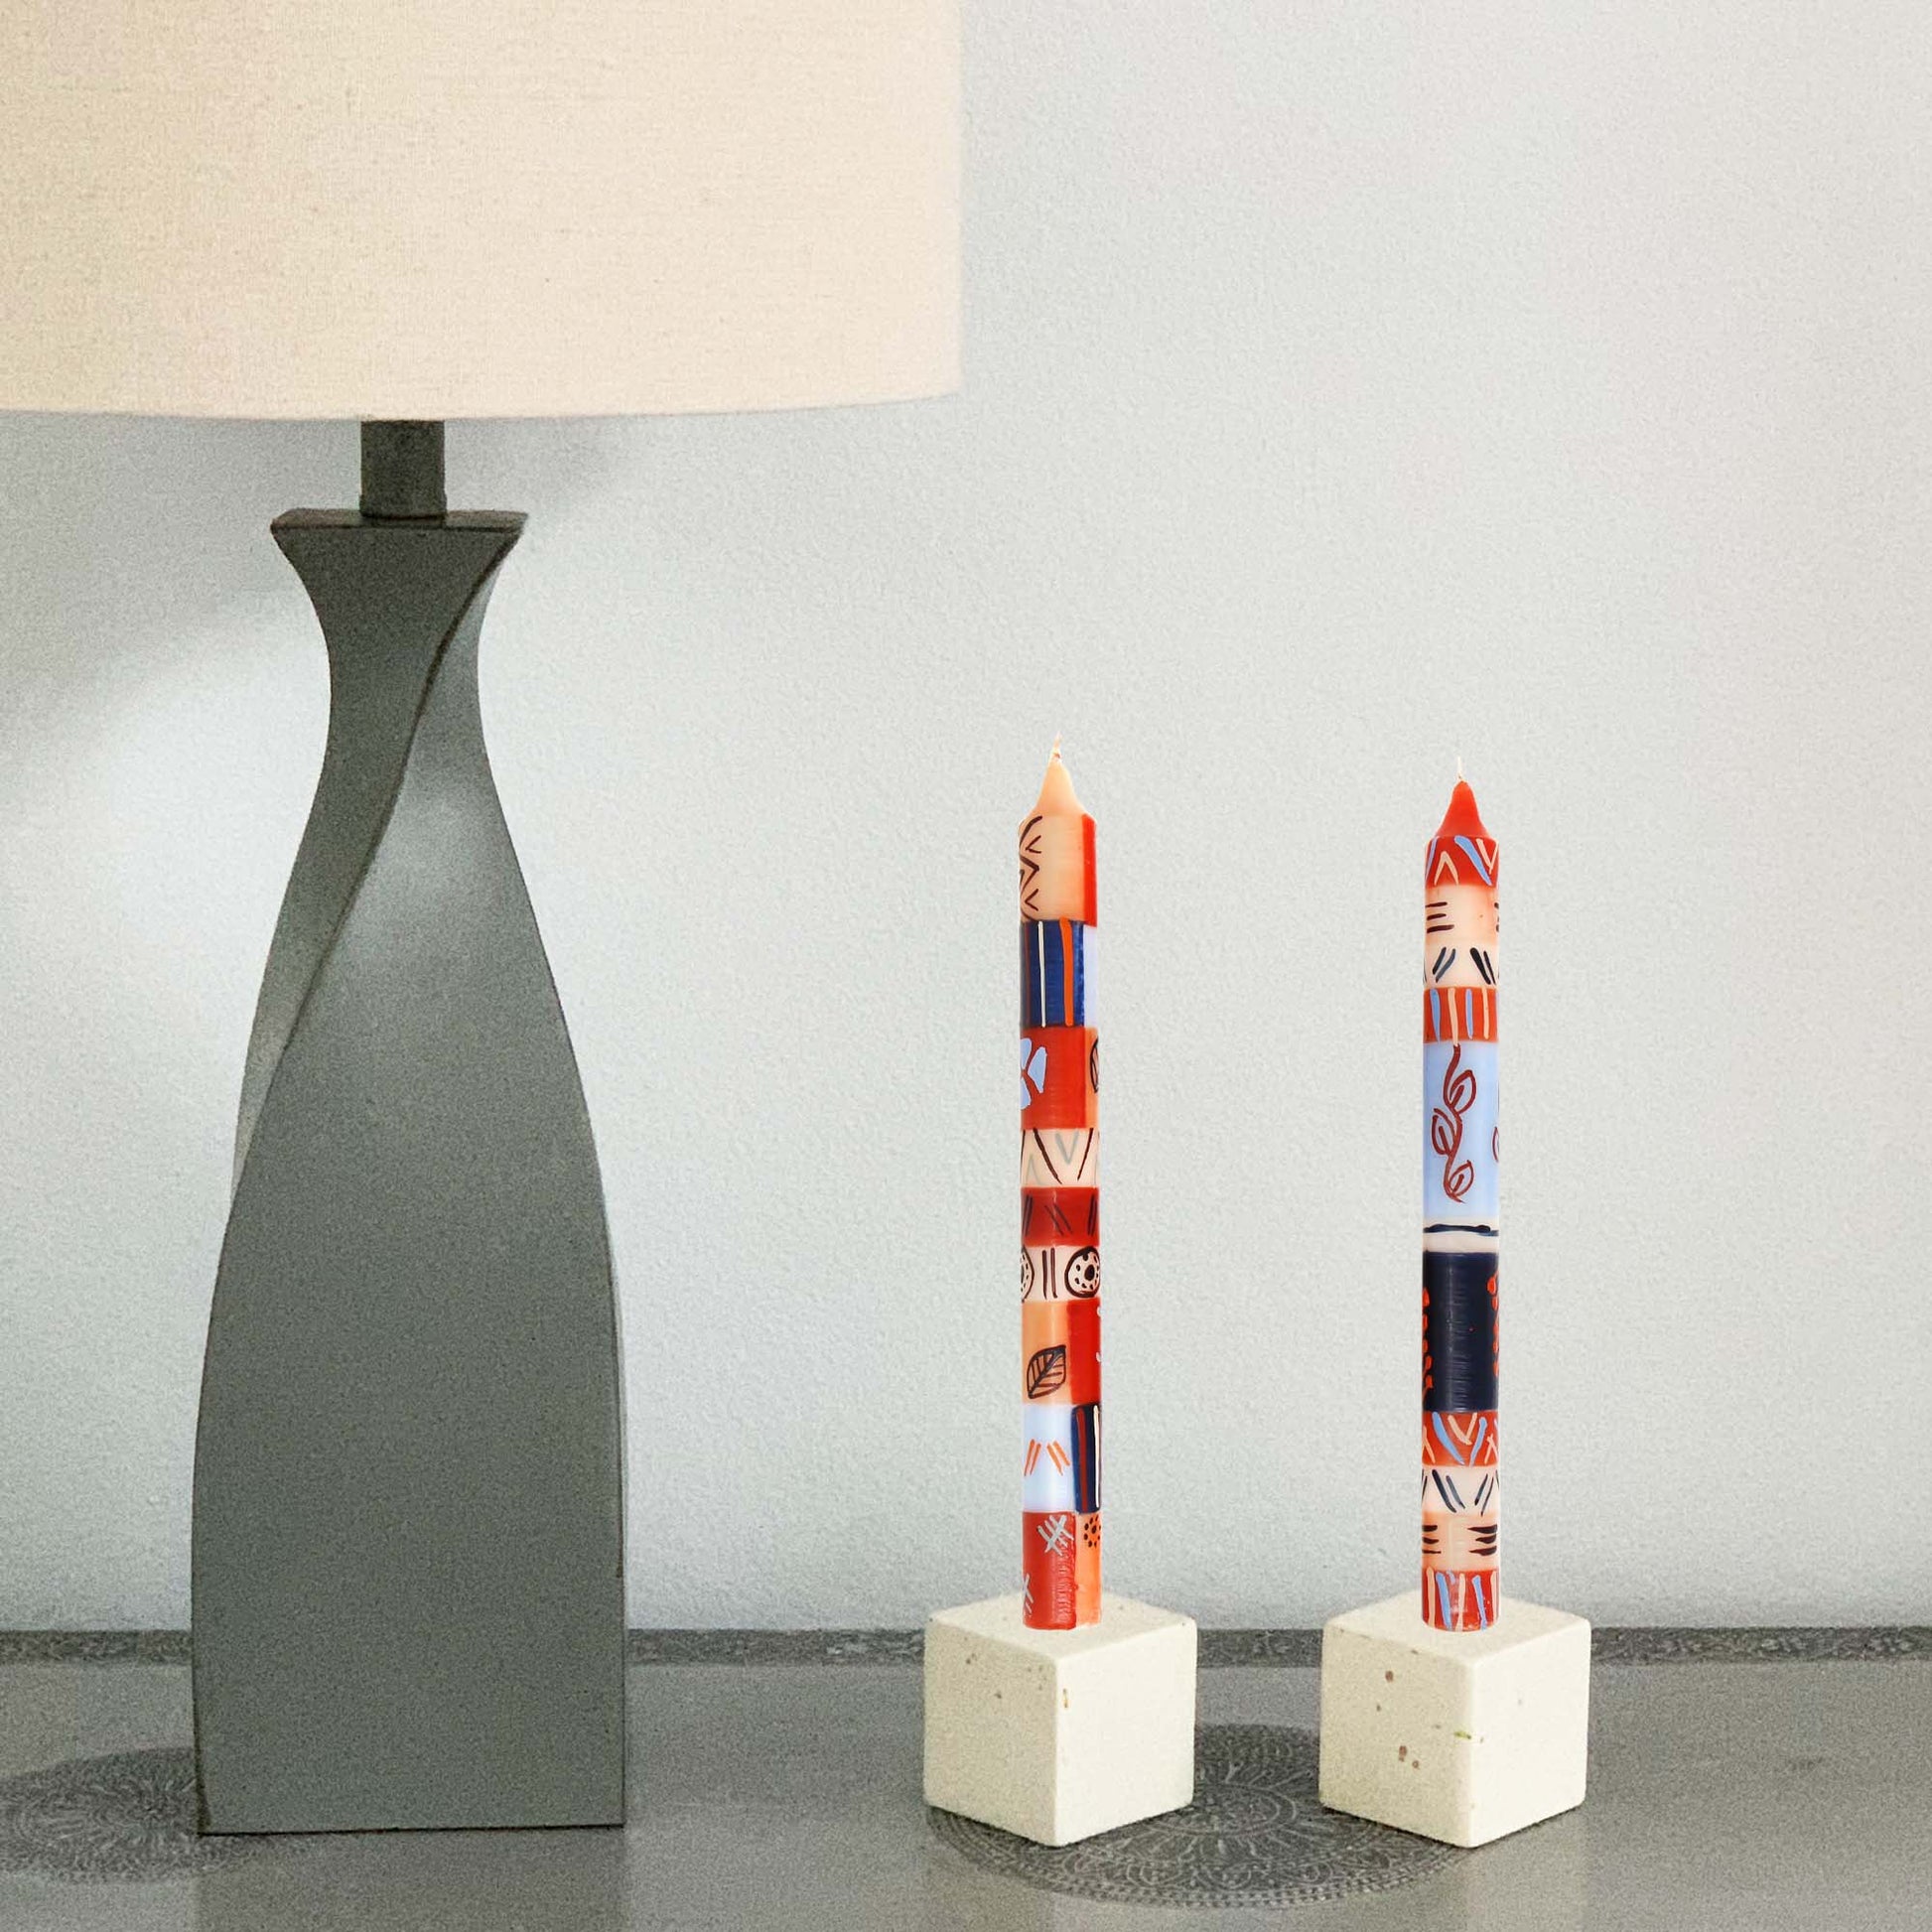 Hand Painted Candles in Uzushi Design (pair of tapers) - Nobunto - Linda Kay Gifford’s - Those Nasty Women TALK! by SWEETSurvivor